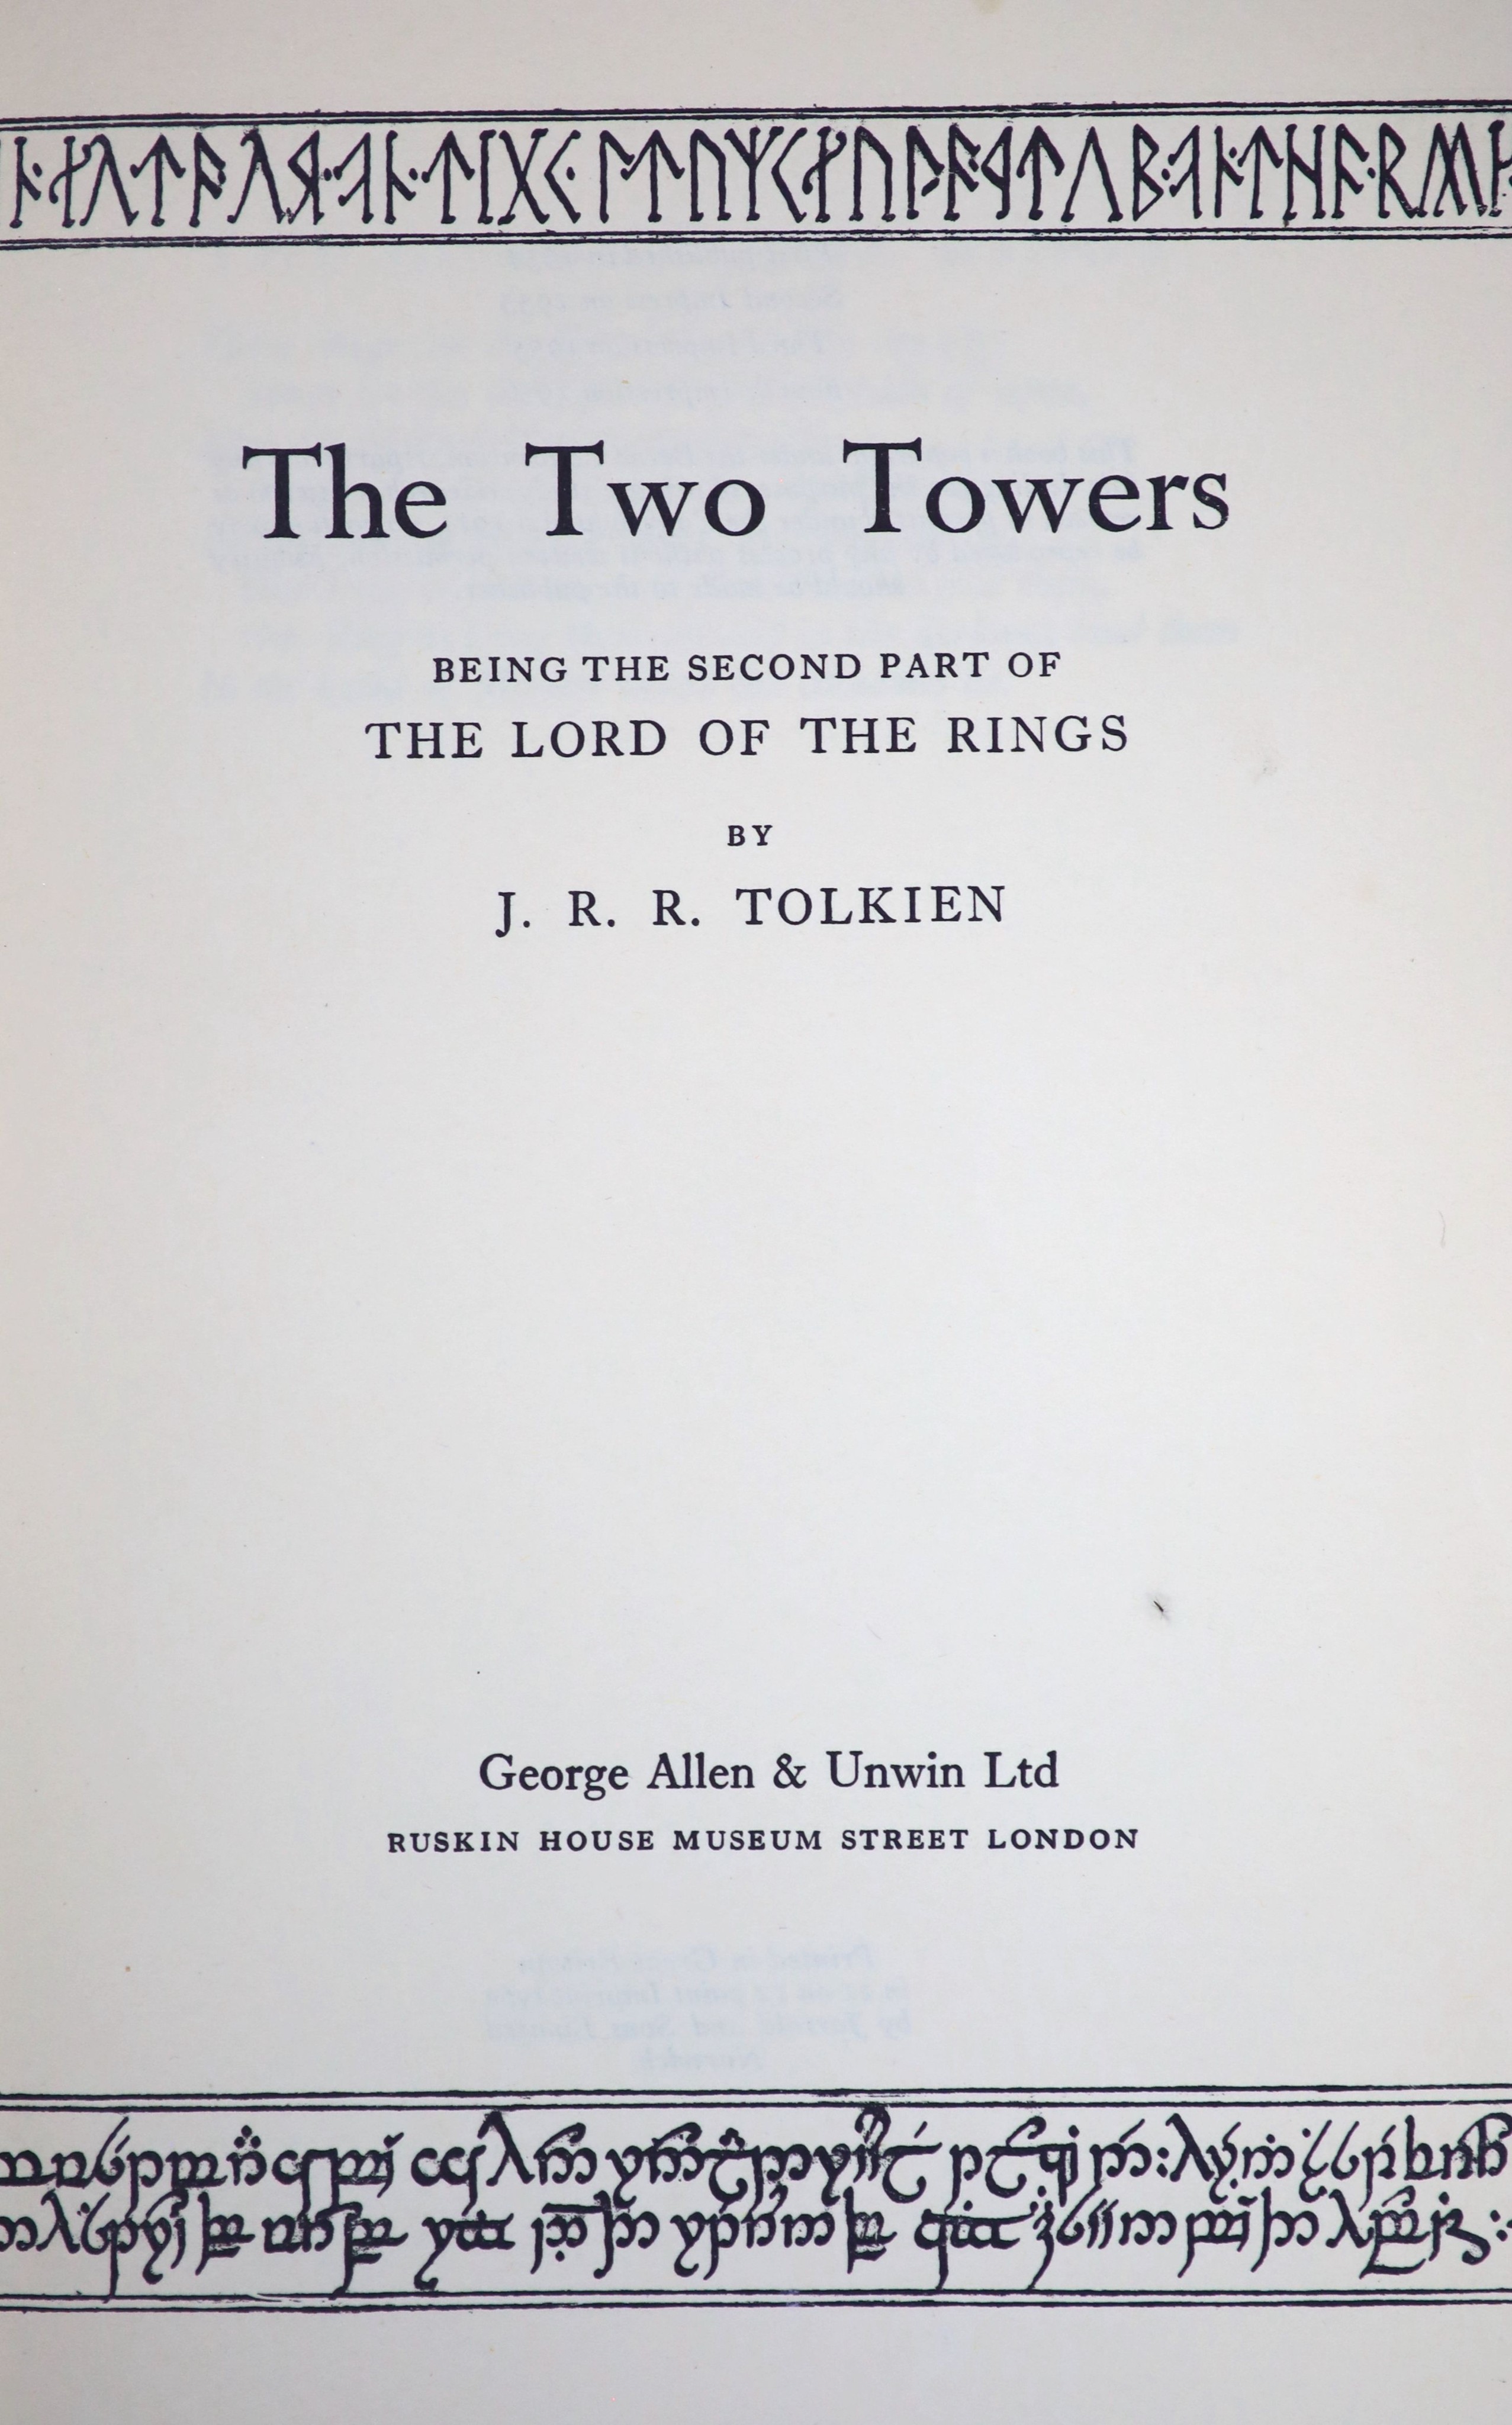 Tolkien, J.R.R - The Lord of the Rings, 3 vols, The Fellowship of the Ring, 5th impression, 1956; The Two Towers, 4th impression, 1956 and The Return of the King, 2nd impression, 1955, rebound red cloth, school prize bin